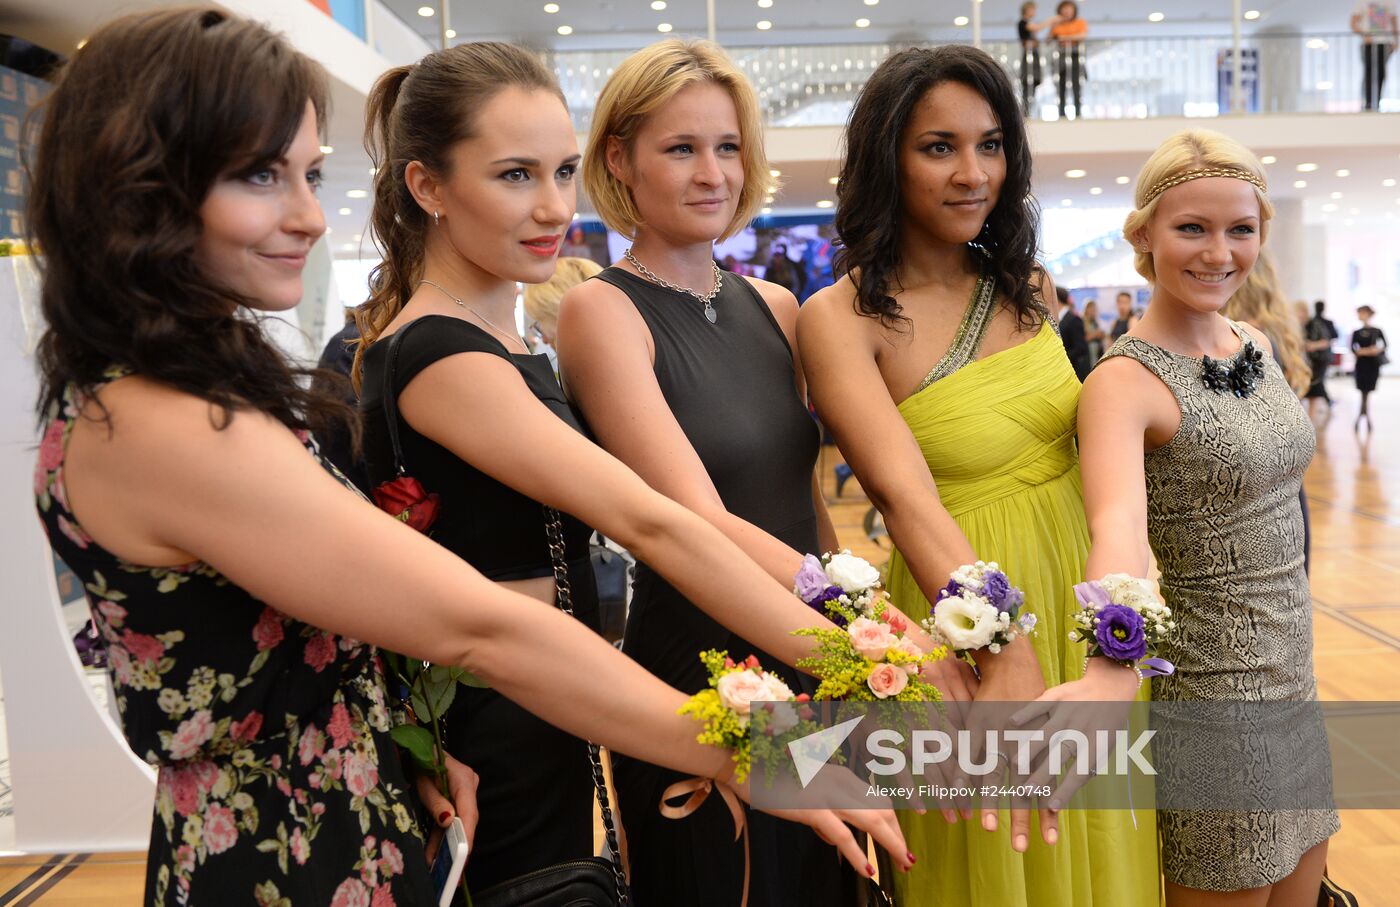 Annual Olympic Ball of Russia 2014 in Moscow